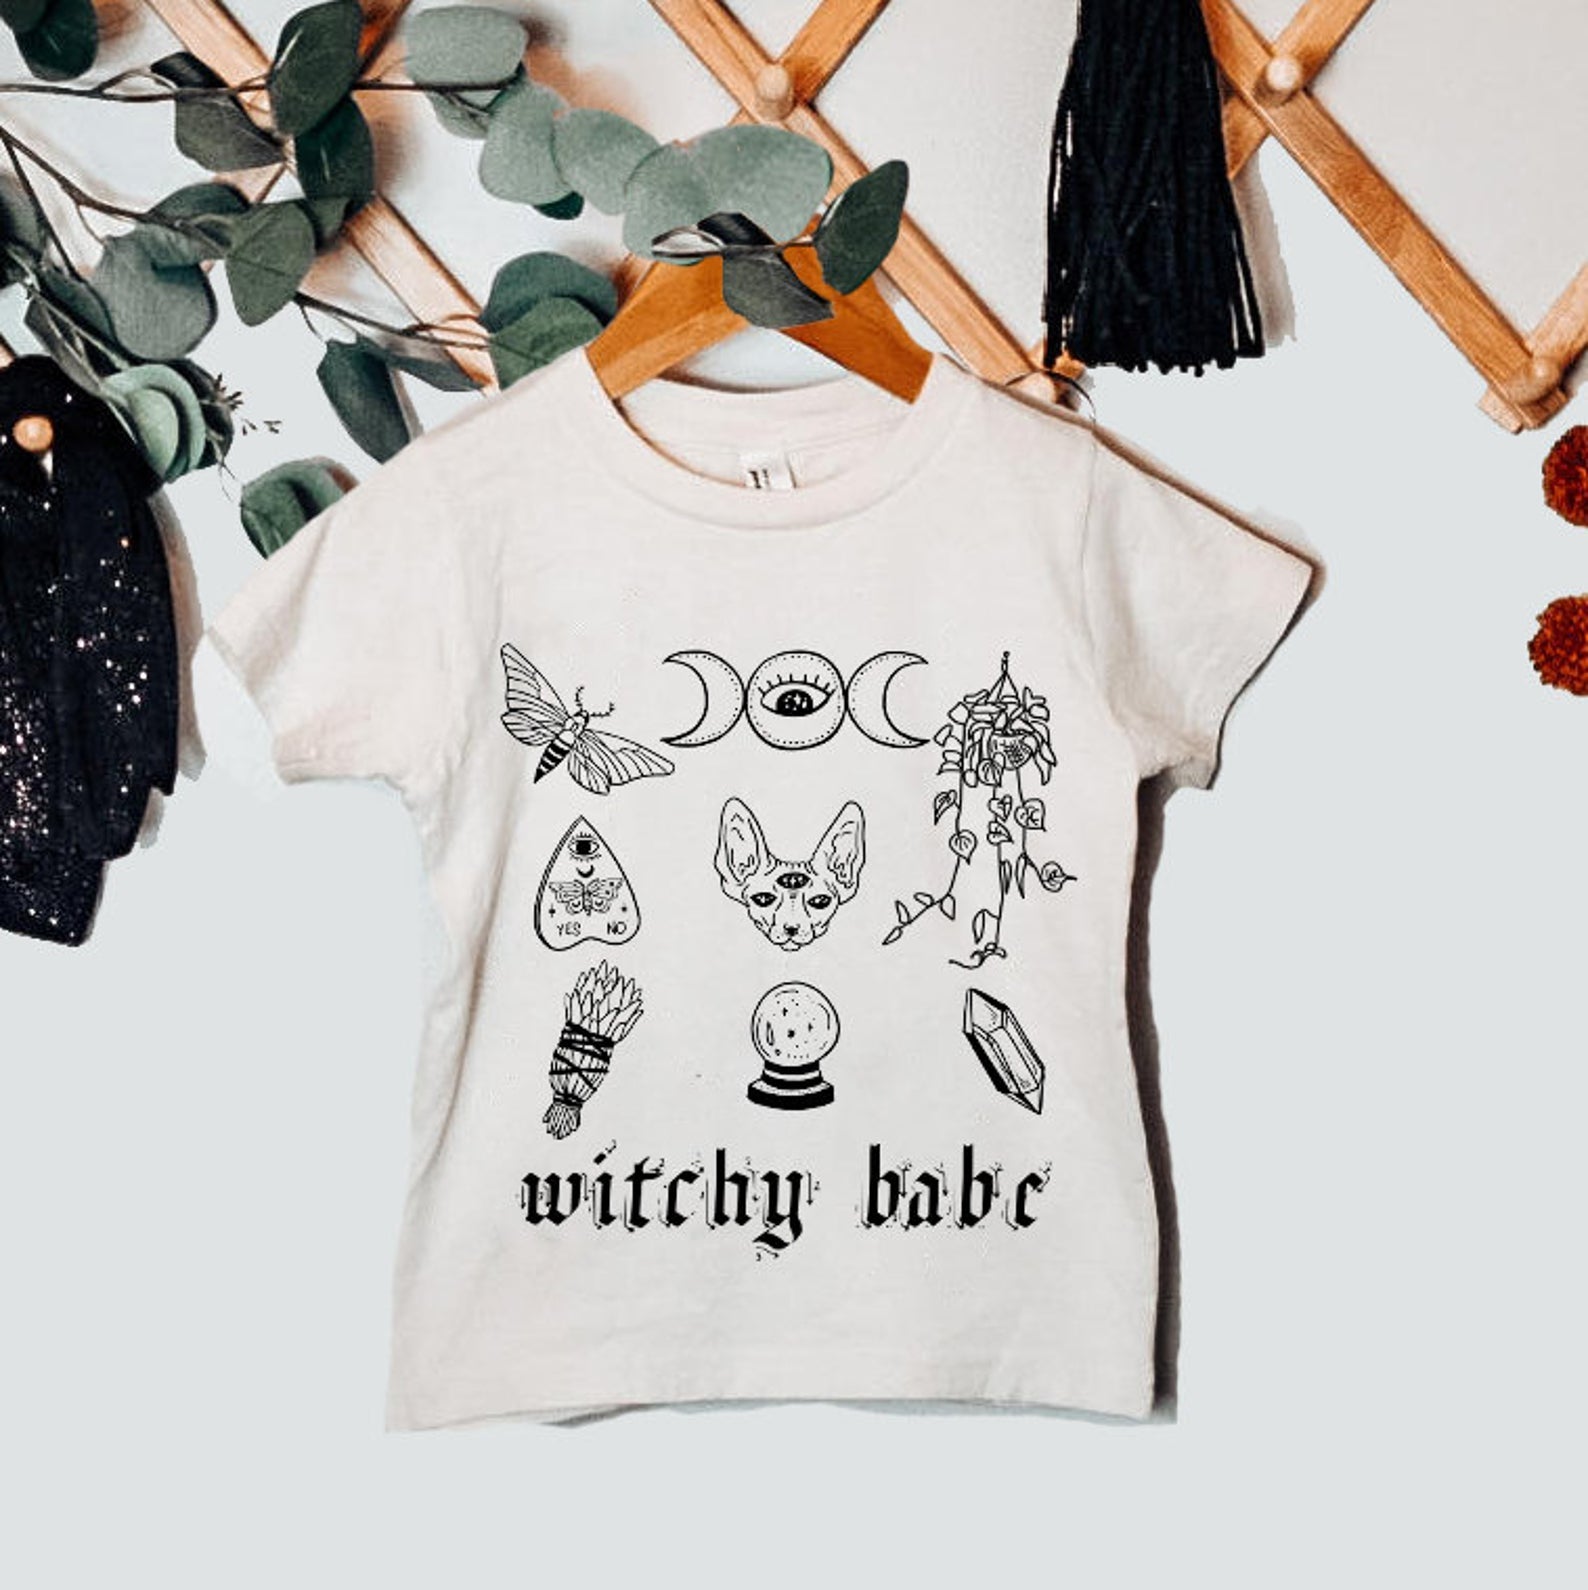 « WITCHY BABE » KIDS TEE